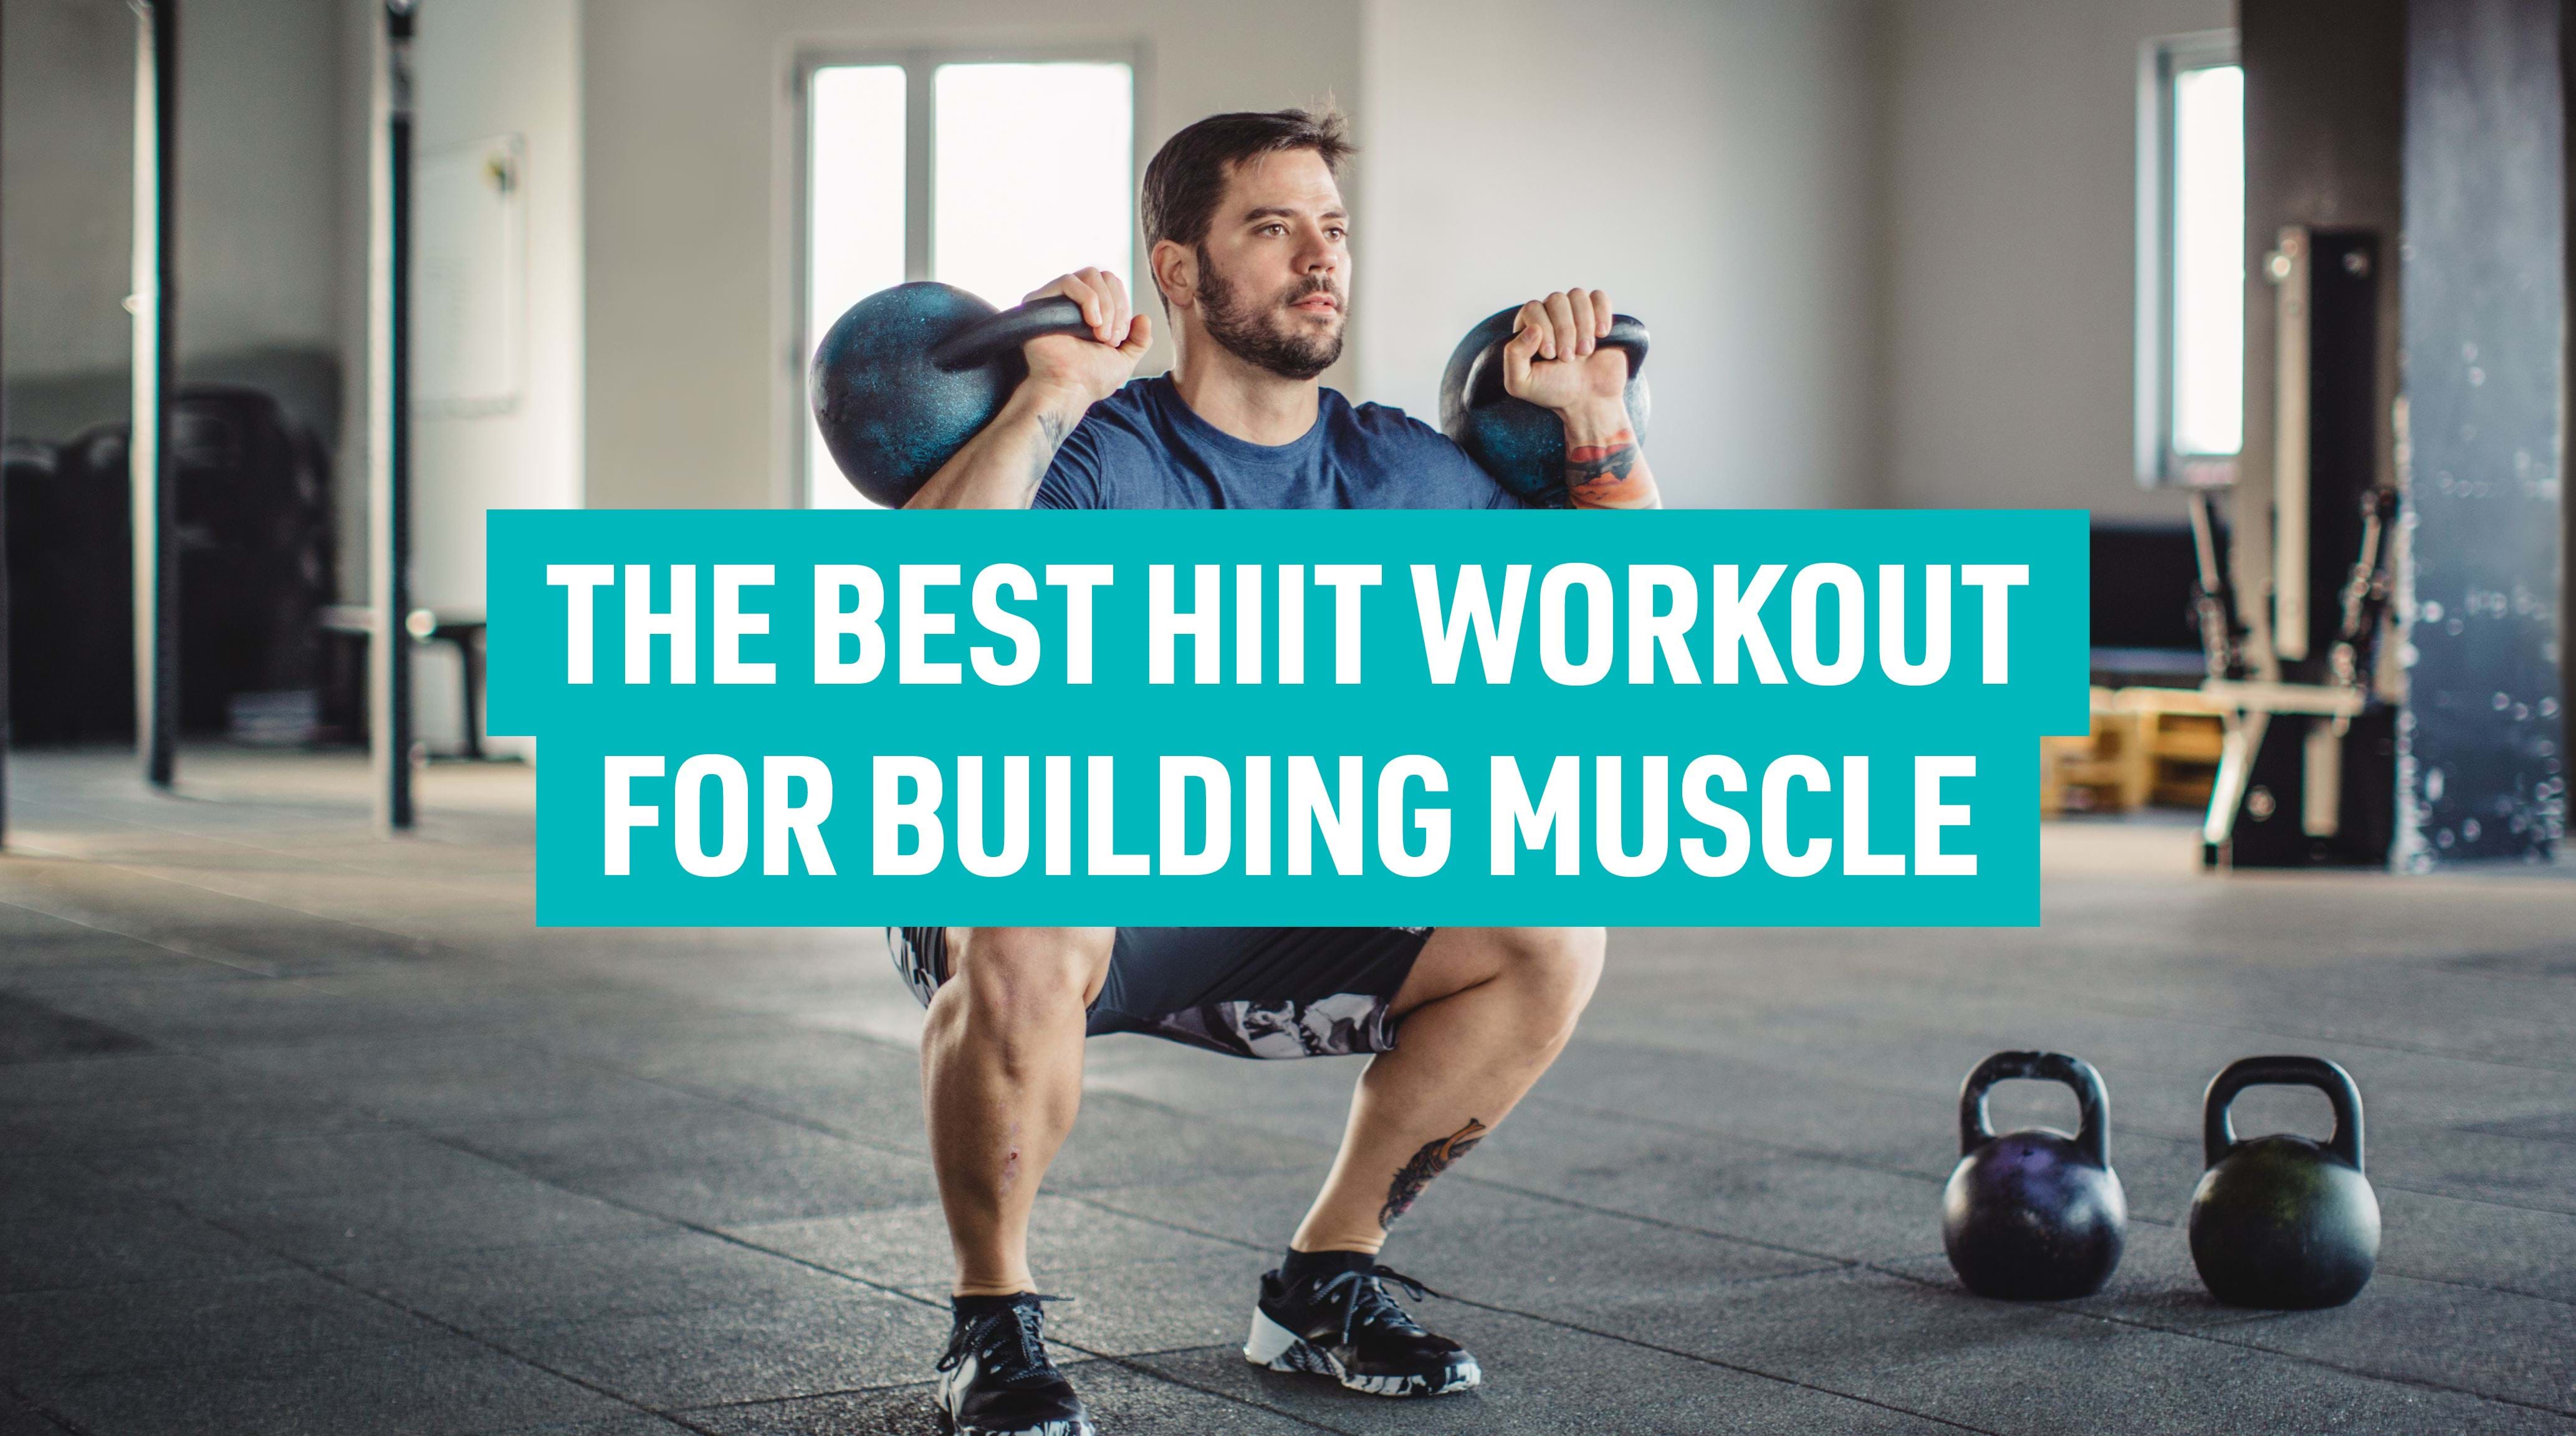 Is High-Intensity Training (HIT) Good for Building Muscle?